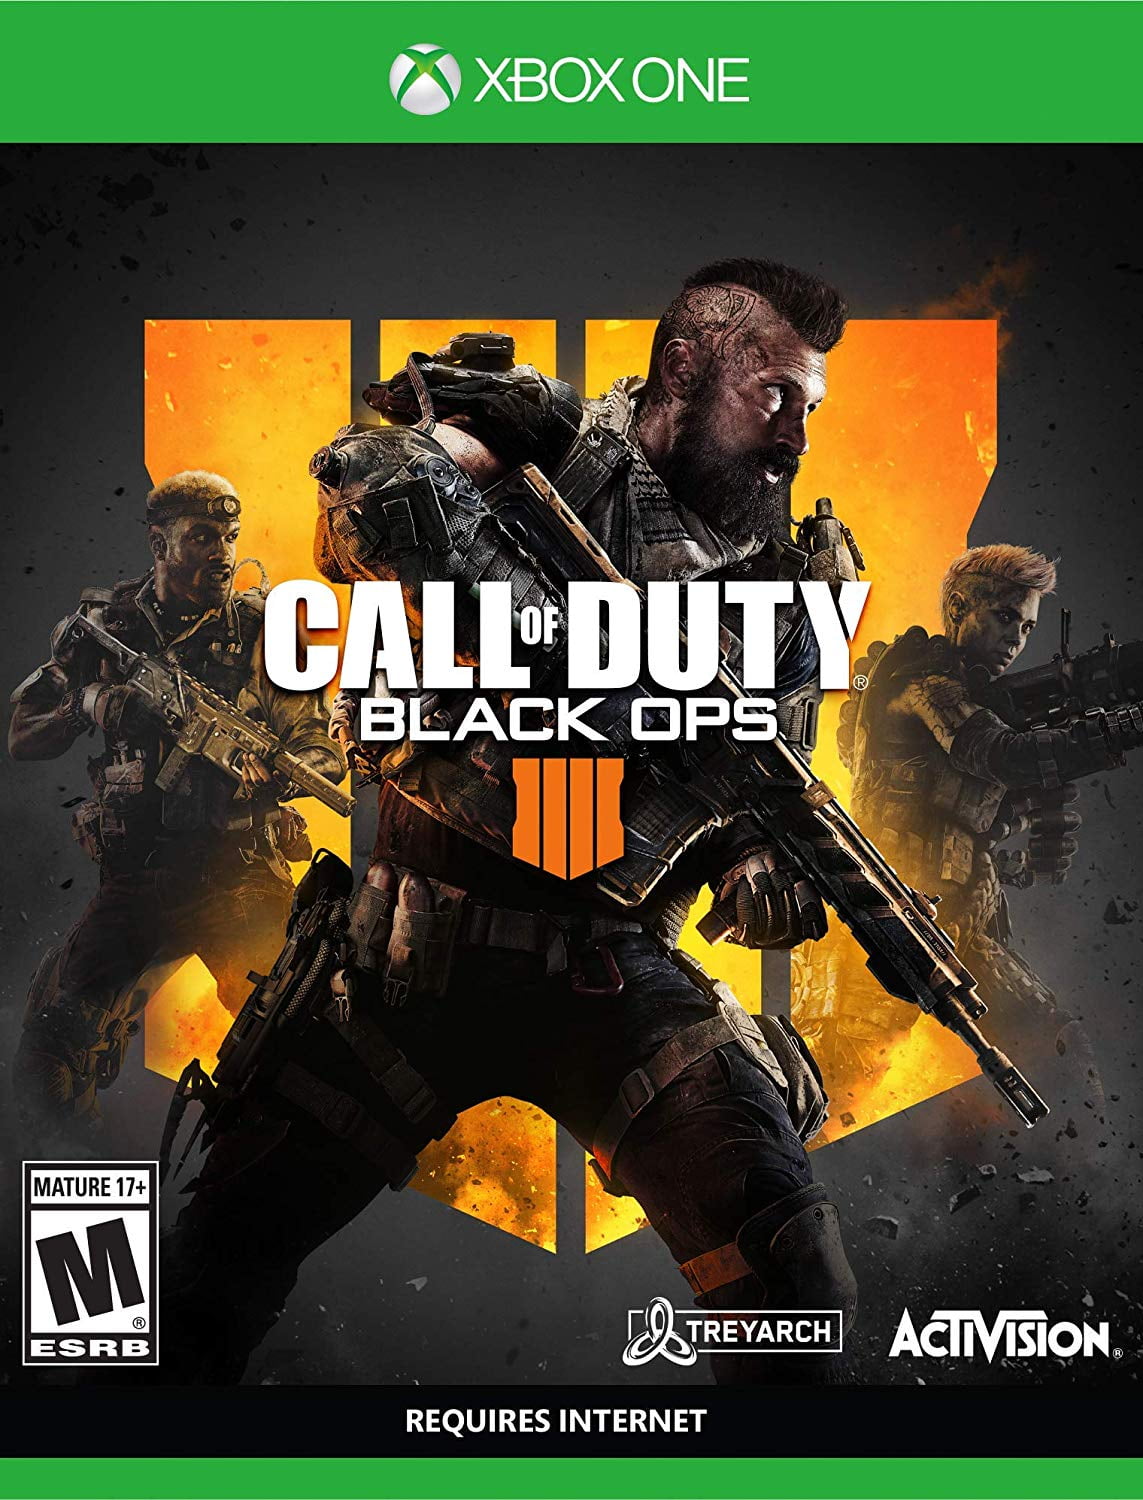 Call Of Duty Black Ops 4 Activision Xbox One 047875882294 Walmart Com